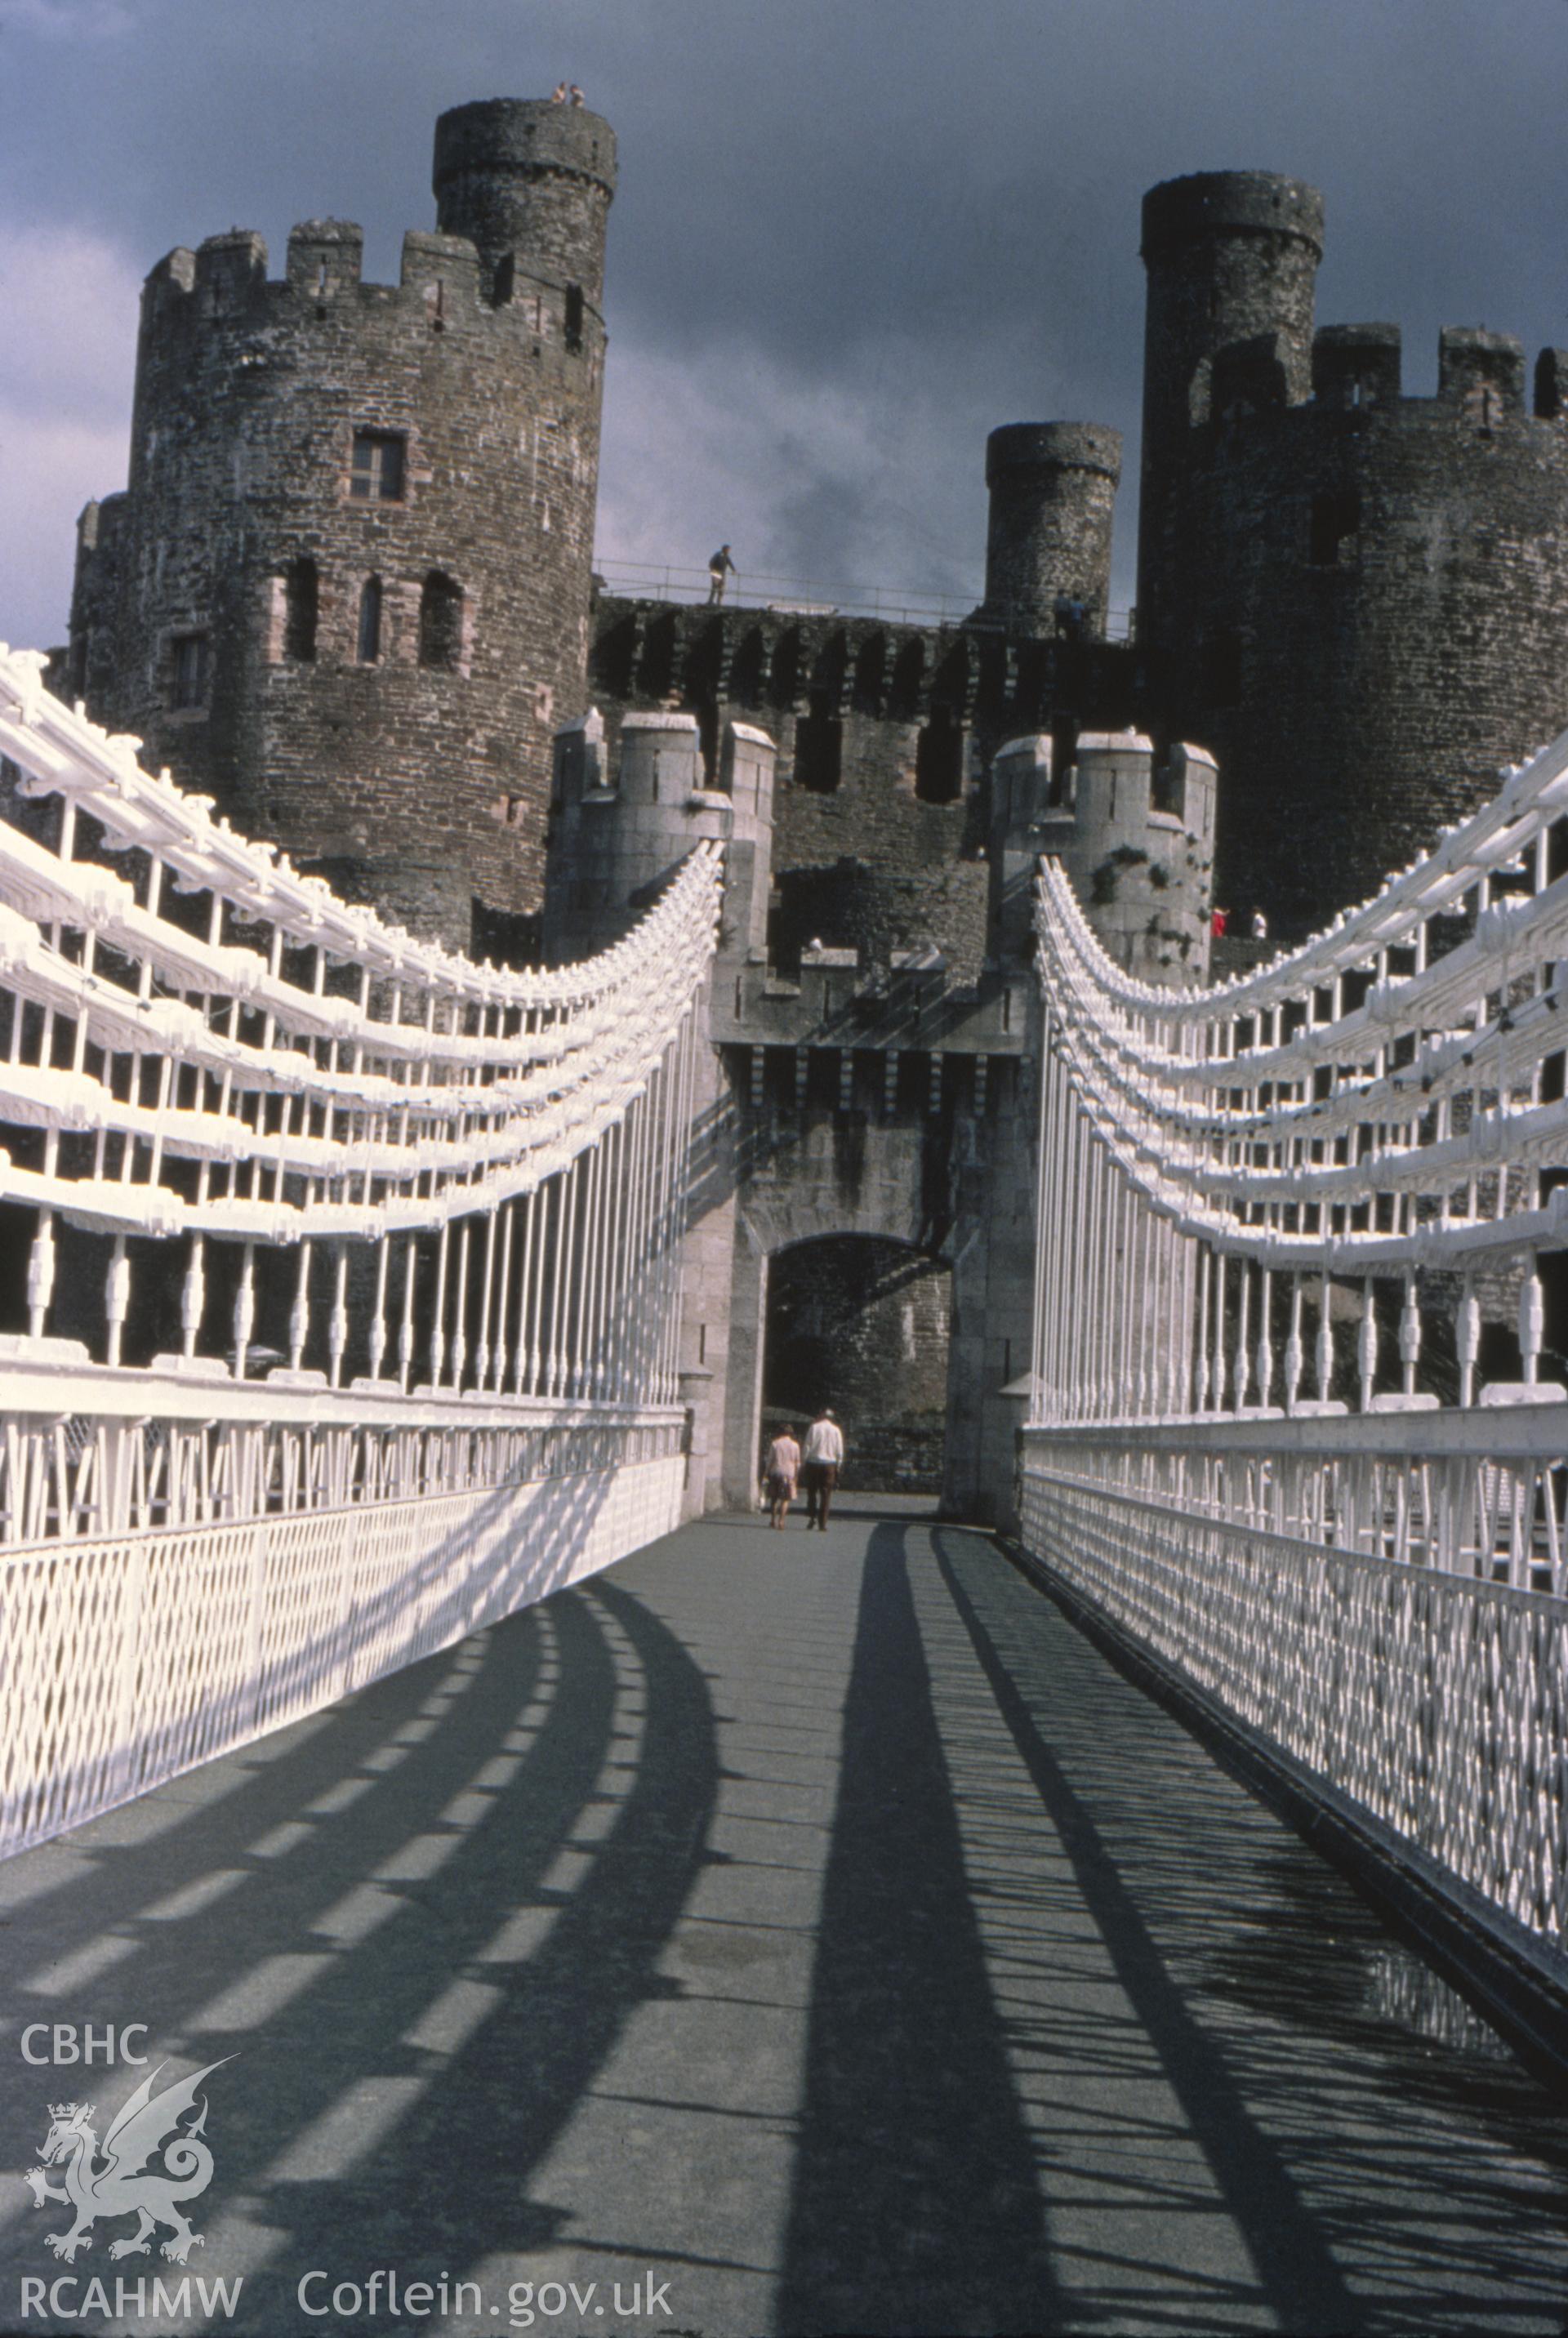 Colour photographic transparency showing view of Conwy castle entrance; collated by the former Central Office of Information.